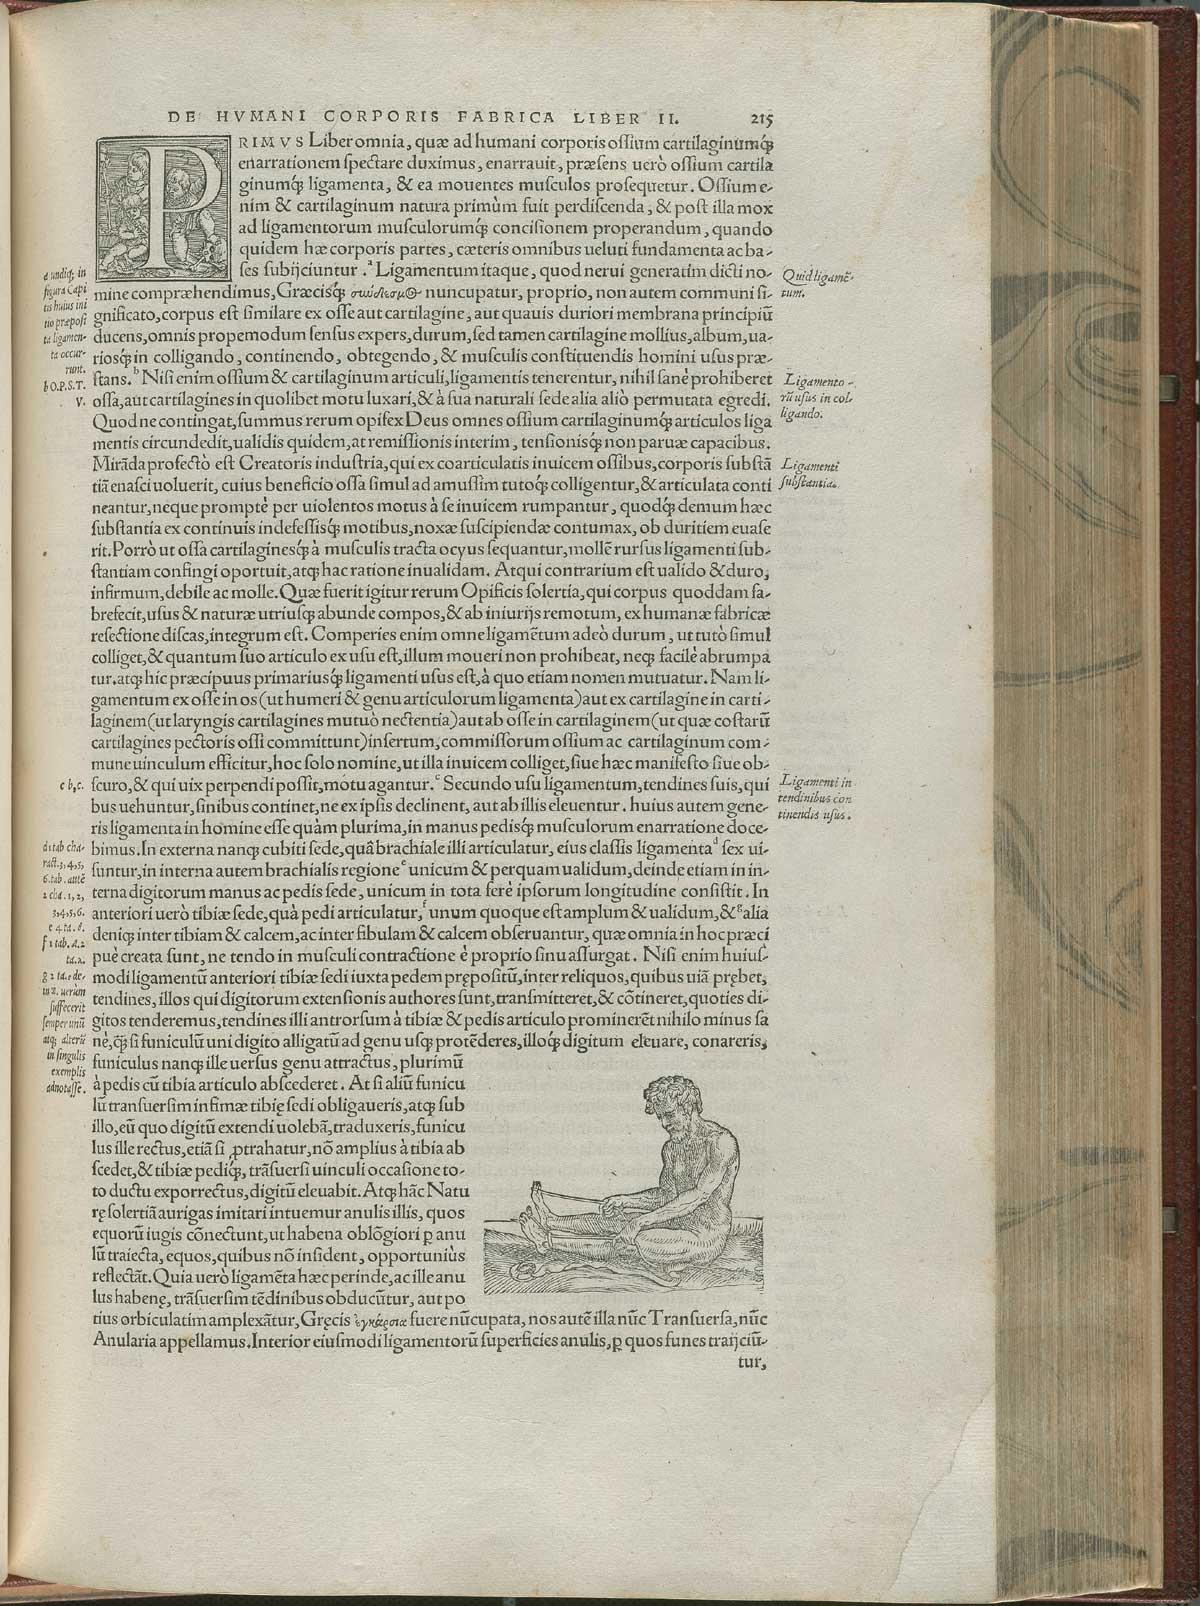 Page 215 of Andreas Vesalius' De corporis humani fabrica libri septem, featuring the illustrated woodcut in the bottom right corner of the page of a nude man sitting on the ground holding rope that is attached to his left ankle and his right toes.